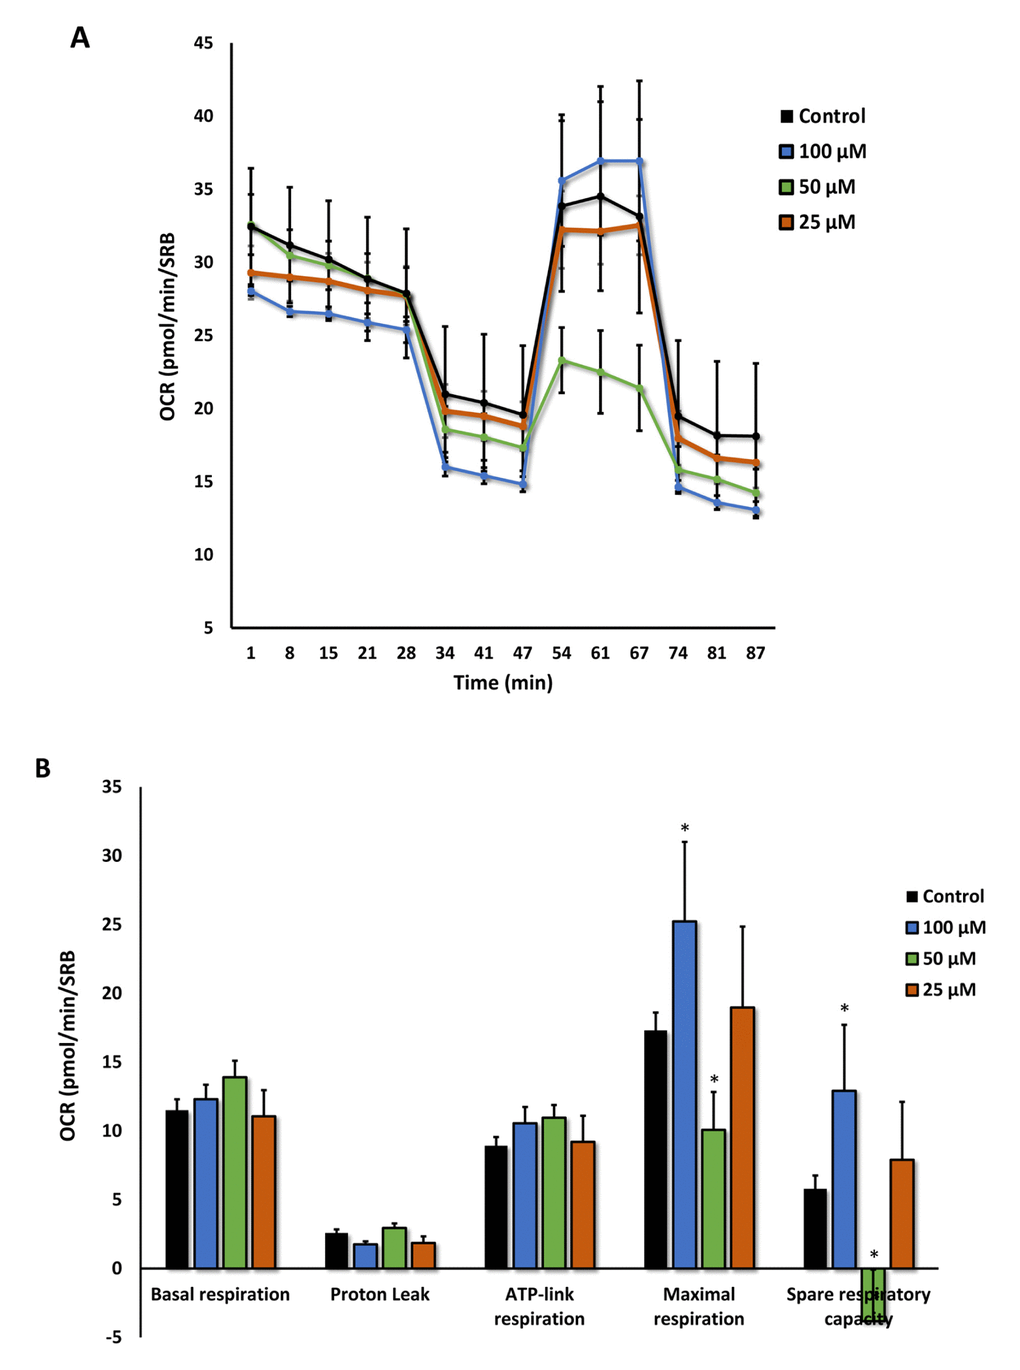 Azithromycin has biphasic effects on oxygen consumption in MRC-5 cells. After 72 hours of treatment with Azithromycin (25 to 100 µM), MRC-5 cells were subjected to metabolic flux analysis with the Seahorse XFe96, which measures OCR (the oxygen consumption rate). Note that the highest dose (100 µM) triggered increased mitochondrial respiration, while the lower concentrations (50 µM) significantly reduced it. However, 25 µM did not have any significant effects on OCR. n=3; * p 